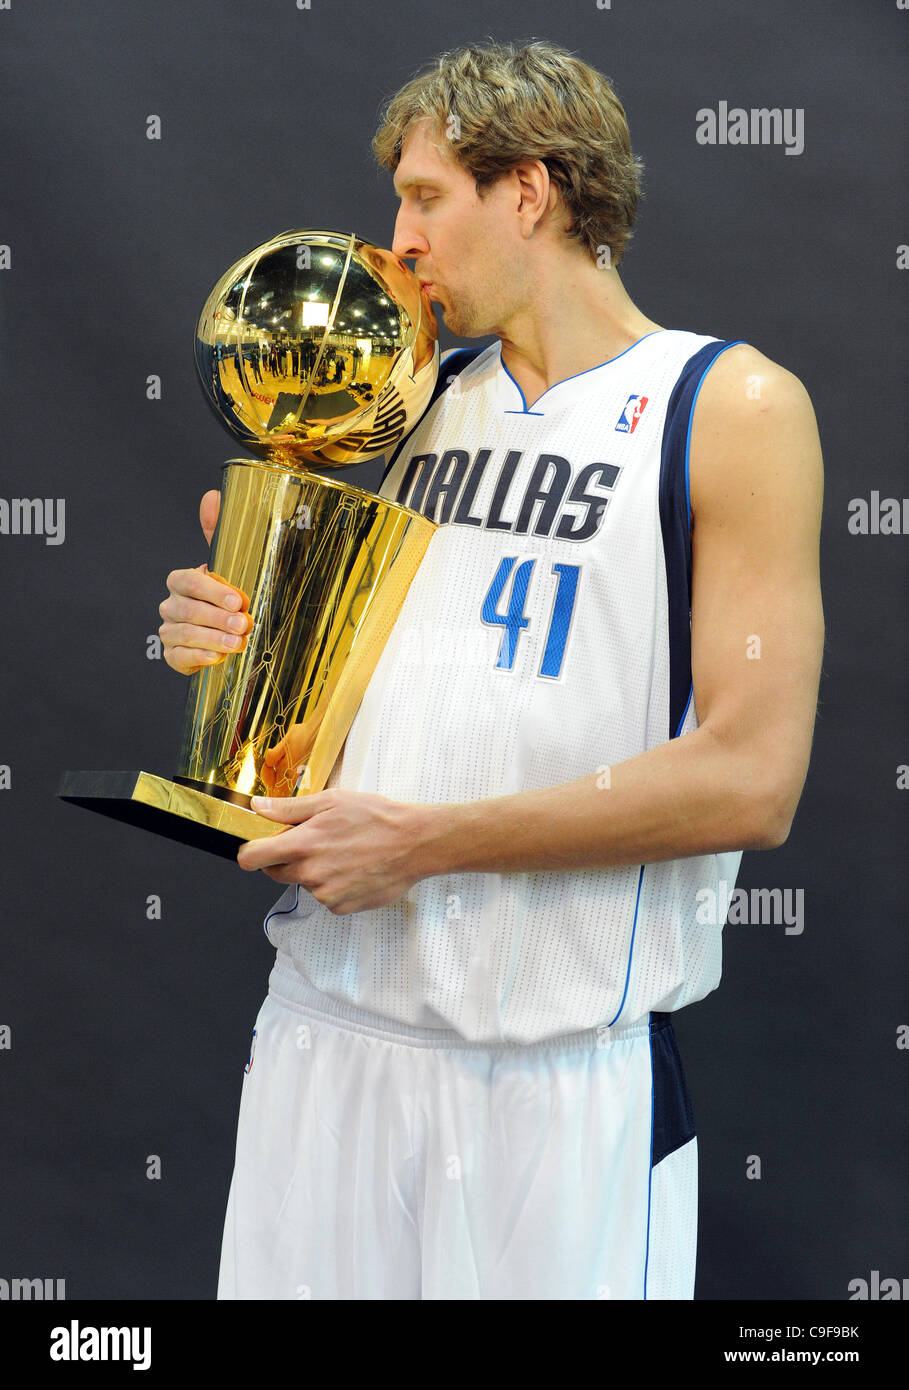 December 13, 2011: Dallas Mavericks point guard Jason Kidd #2 poses with  the Larry O'Brien Championship trophy during Dallas Mavericks Media Day at  the American Airlines in Dallas, TX(Credit Image: © Albert